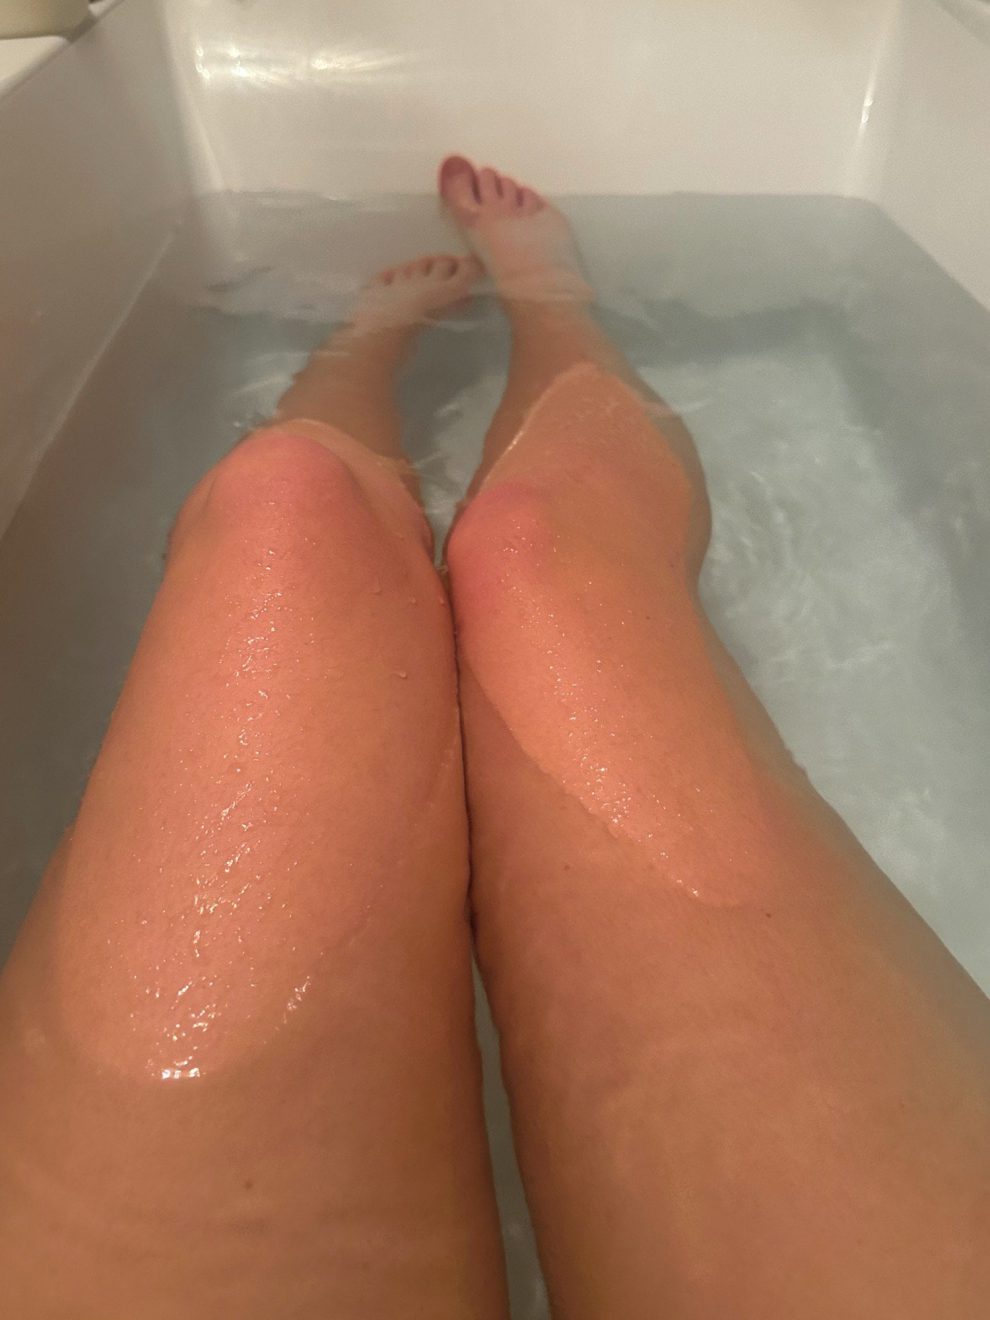 Come soak with me and feel my legs 🥰